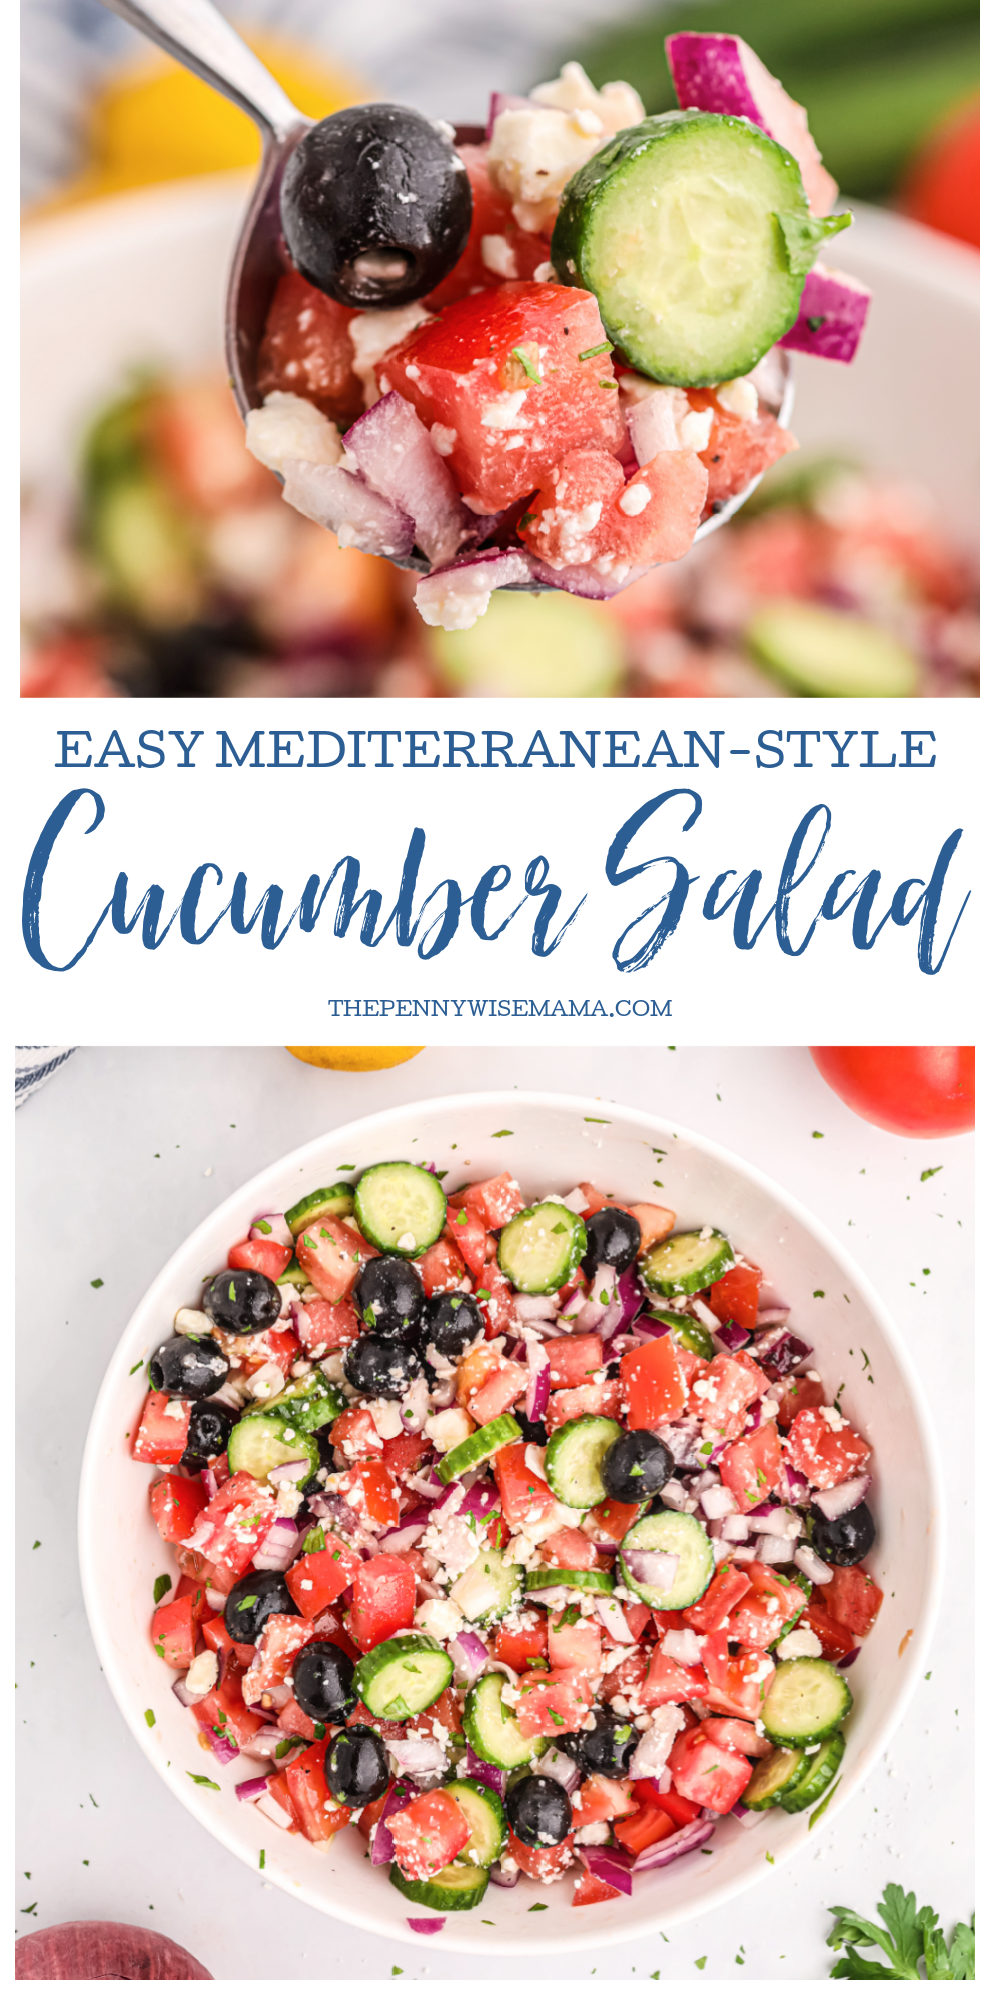 This Mediterranean-style cucumber salad is the perfect side dish for summer! Light, fresh, and full of flavor + low-carb and gluten-free, it’s a crowd favorite. Serve it at your next family get-together, potluck, or barbecue.